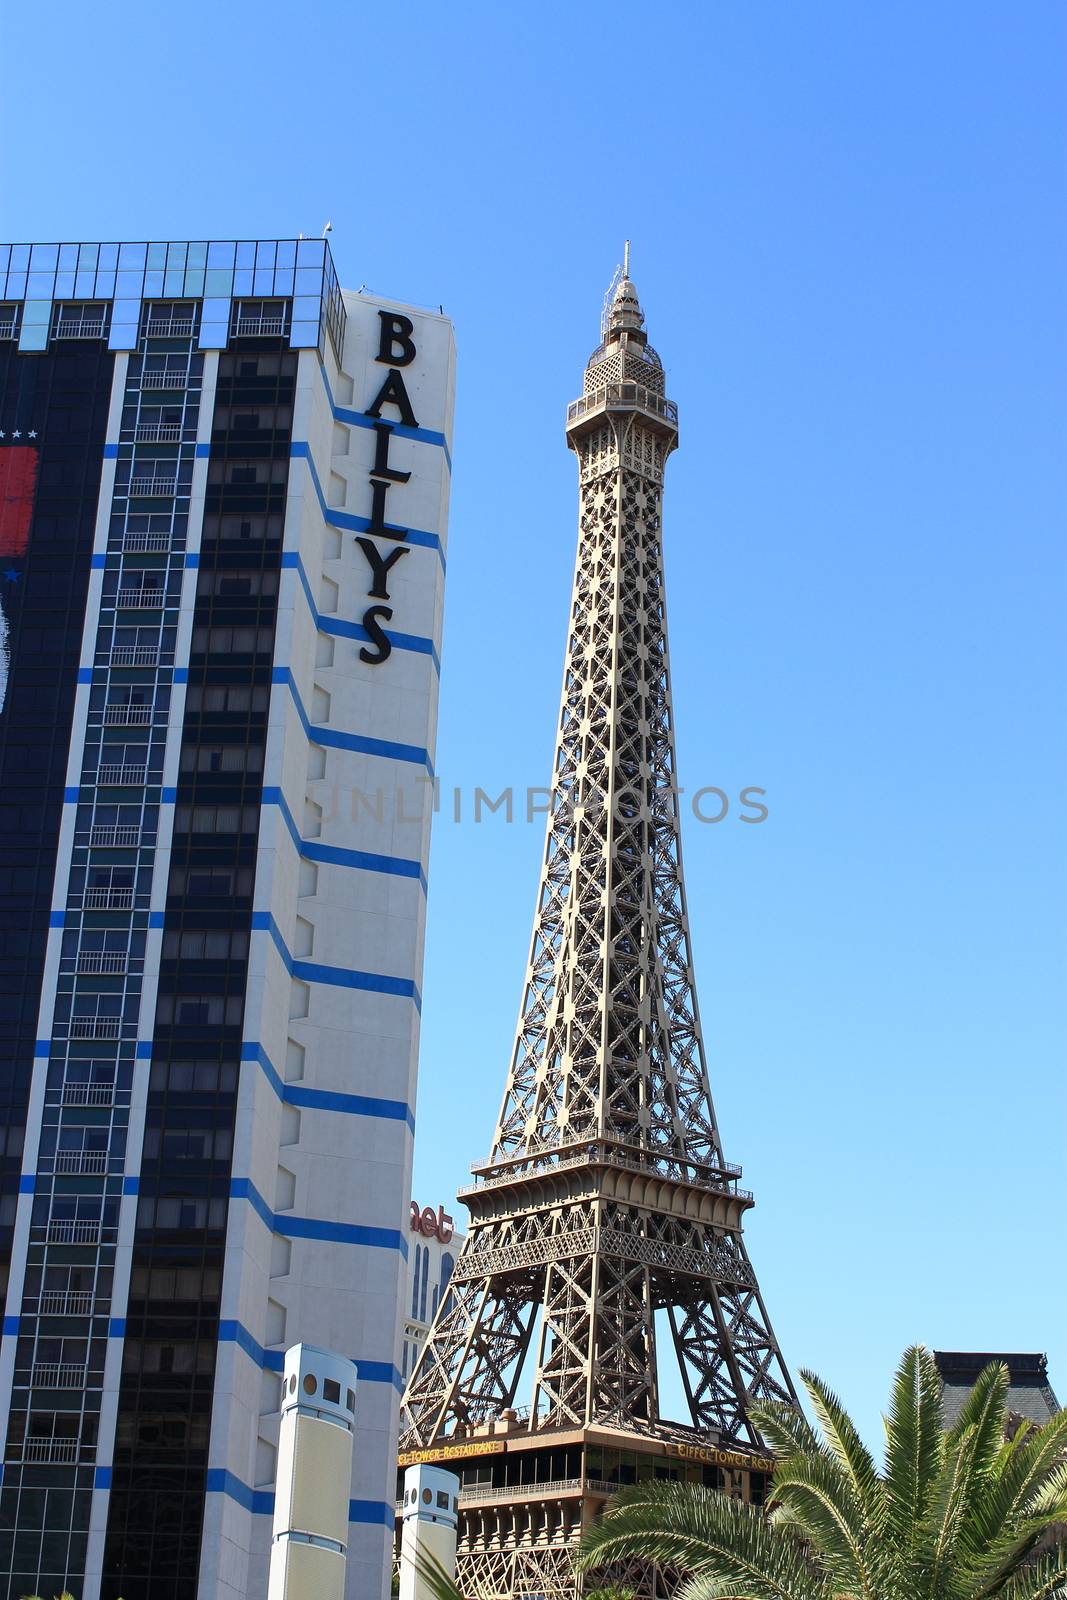 Eiffel Tower at the Paris Hotel and Casino in Las Vegas towers over the famous Strip.